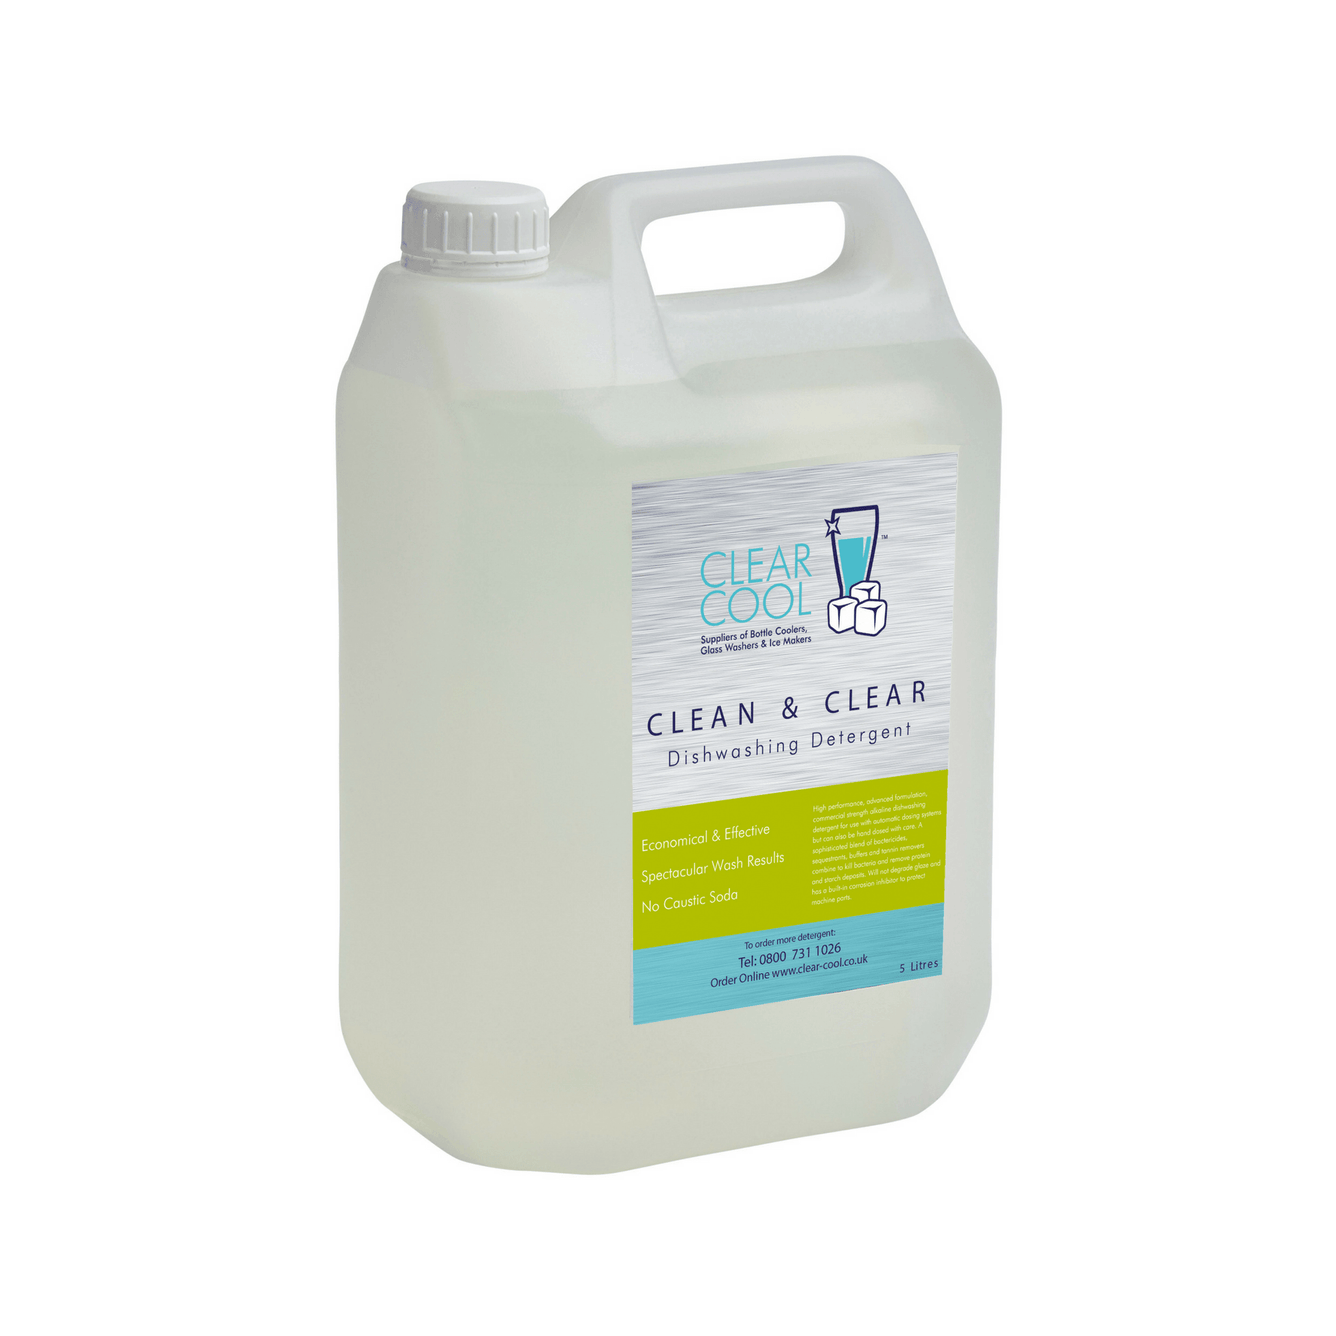 Clean & Clear Detergent and Rinse Clear Rinse Aid For Dish Washers - Clear Cool